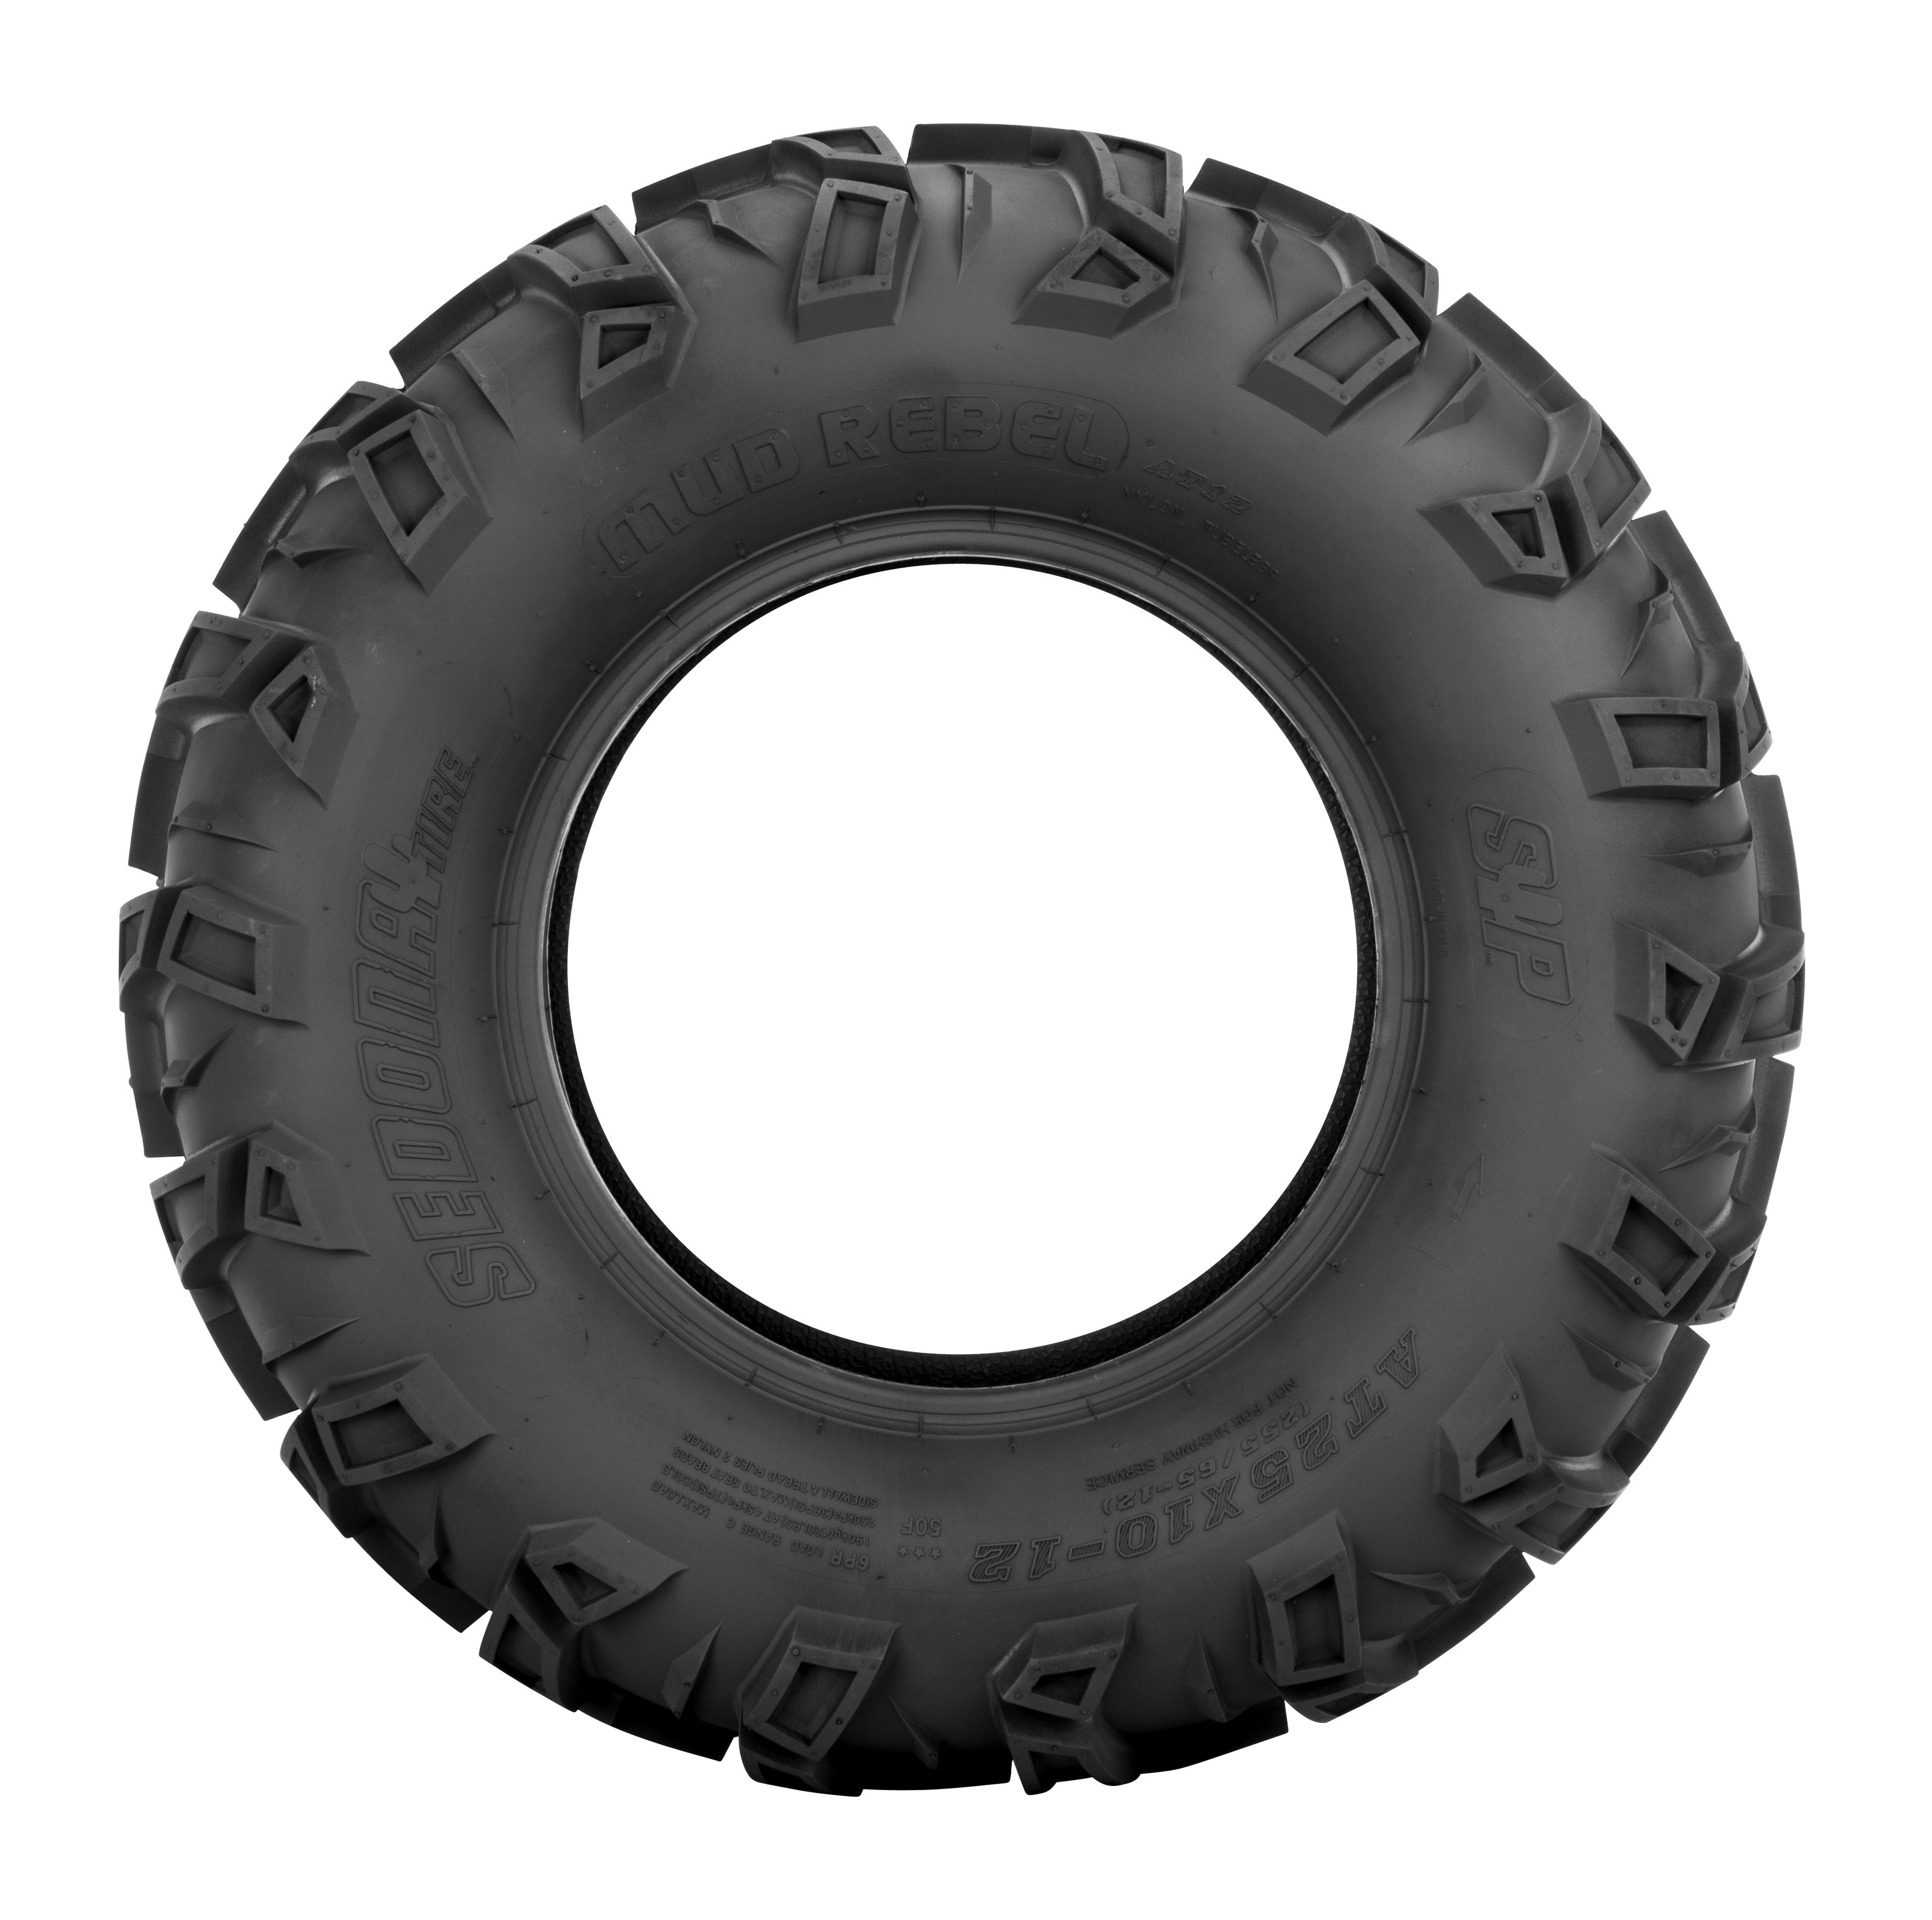 22X8-10 Mud Rebel Front Tire 6-Ply - Click Image to Close